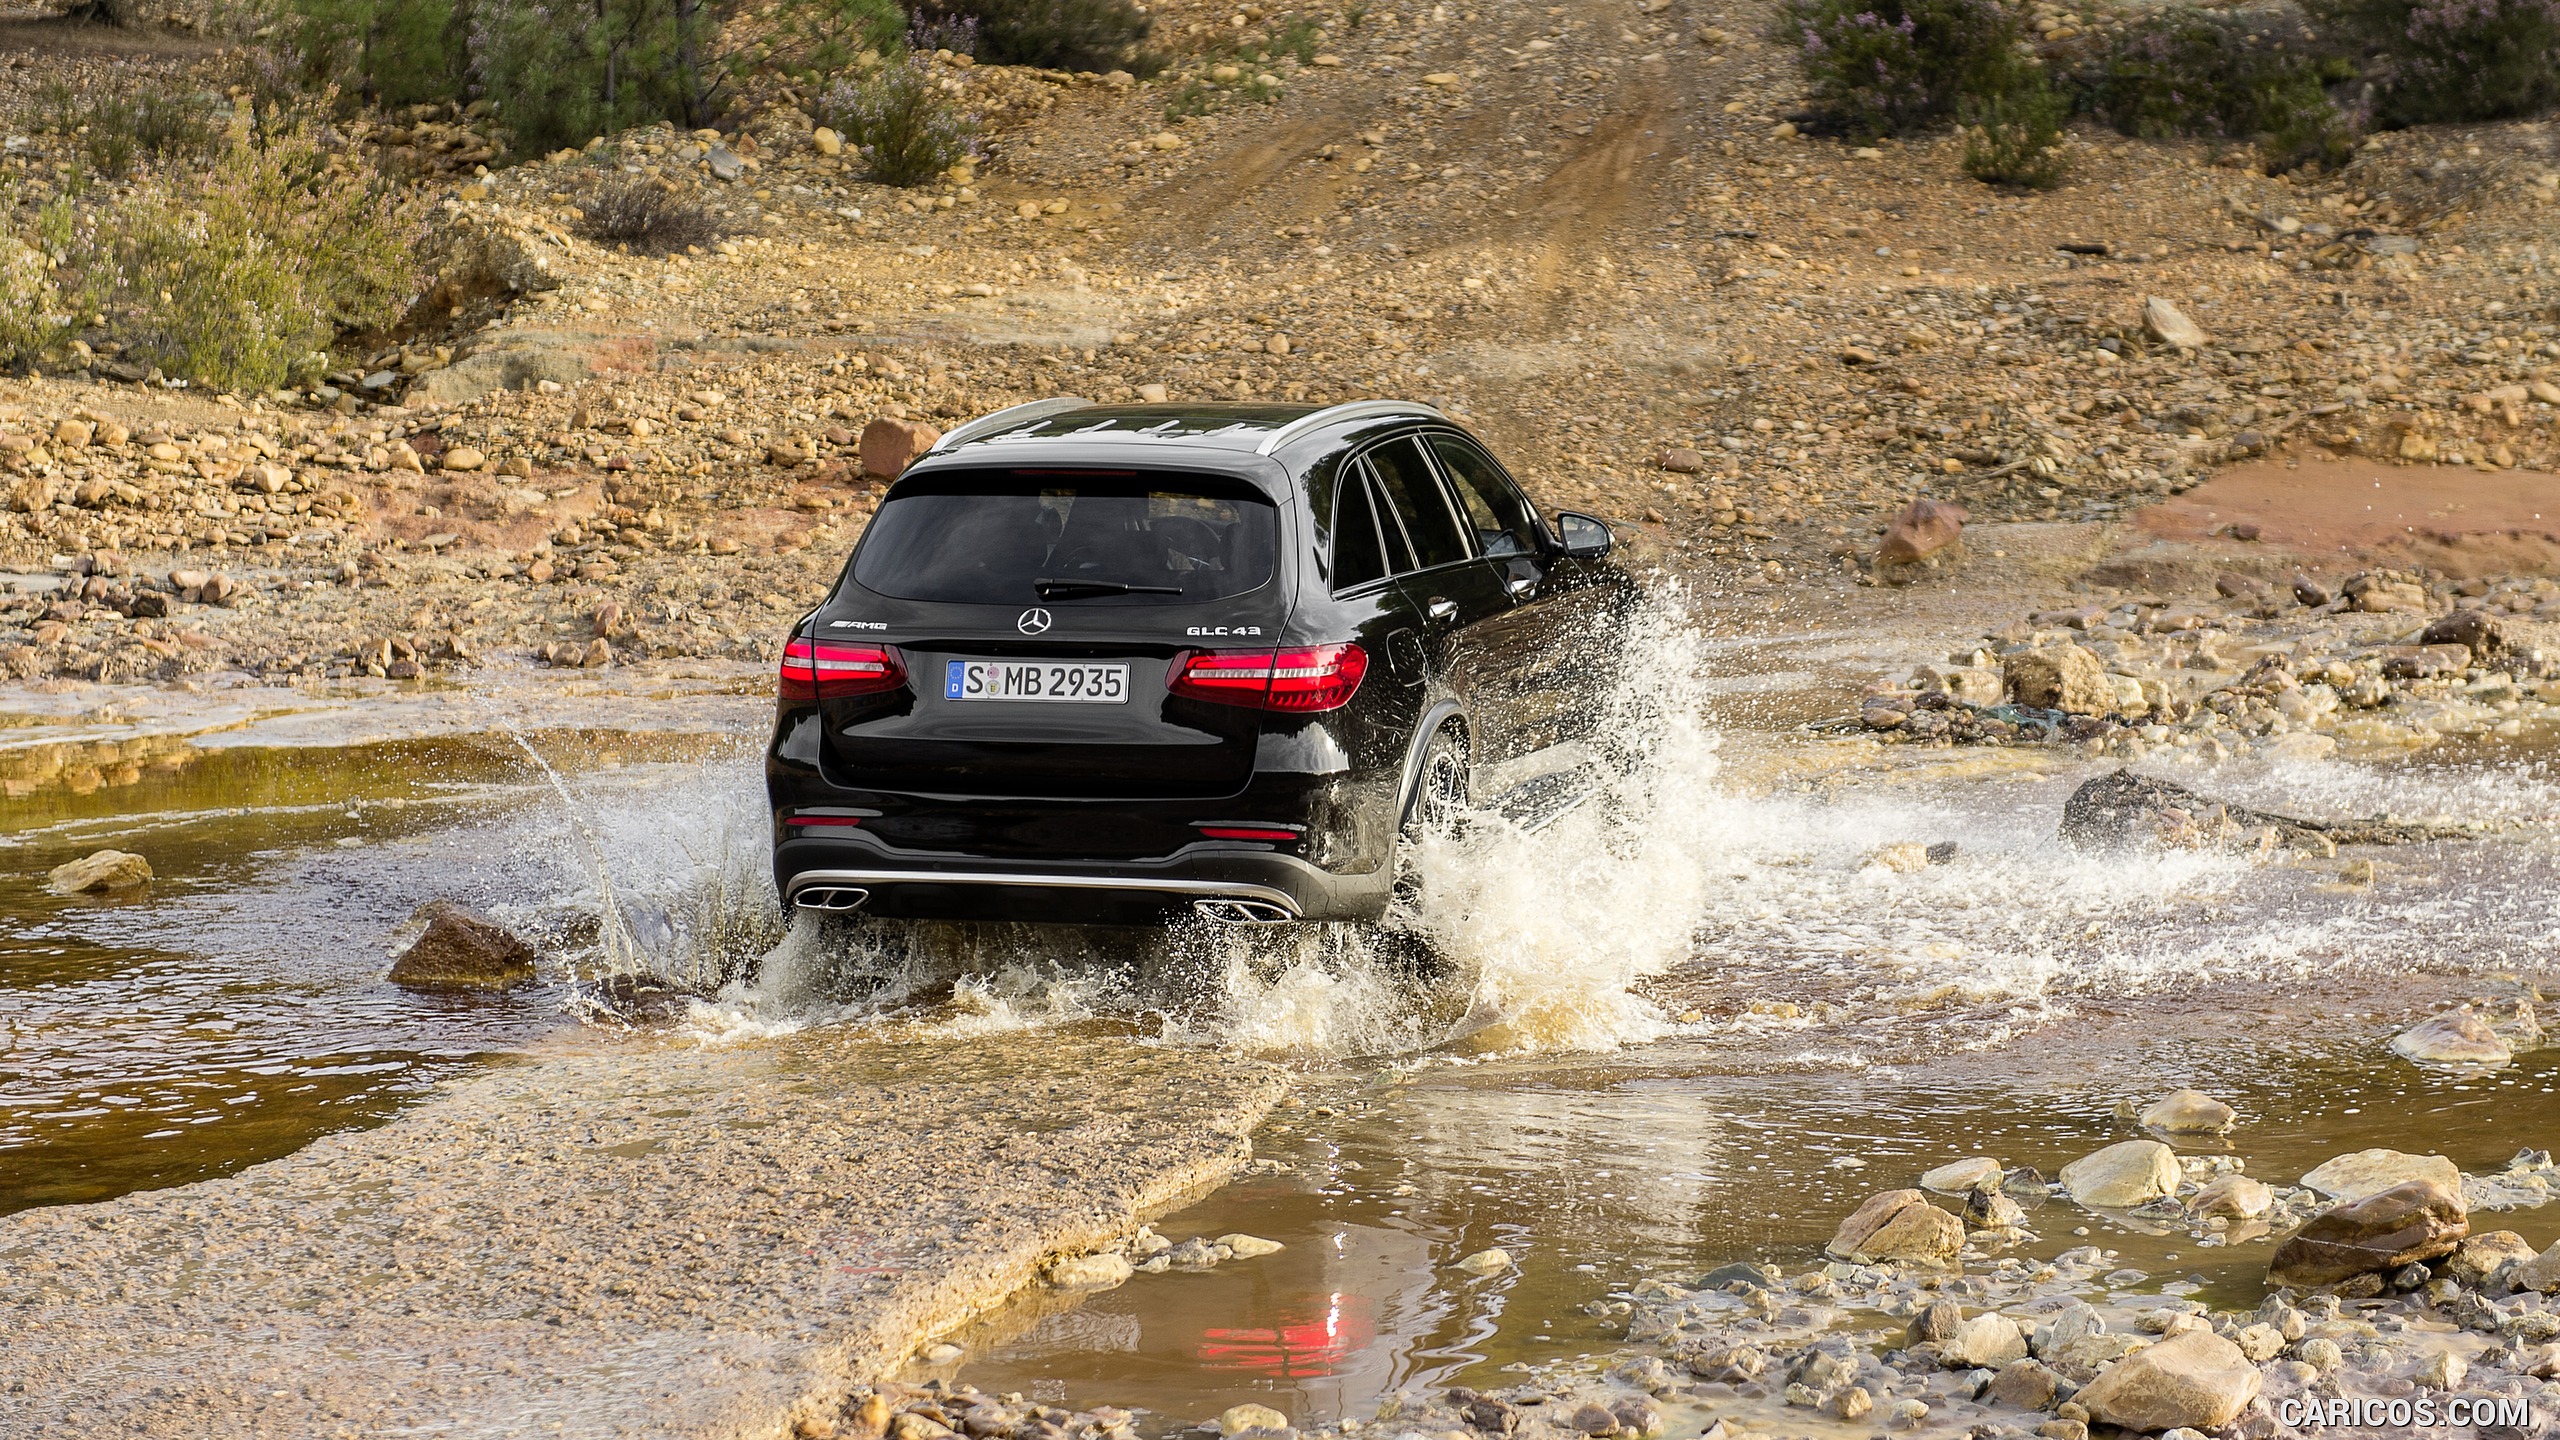 2017 Mercedes-AMG GLC 43 4MATIC (Chassis: X253, Color: Obsidian Black) - Off-Road, #22 of 108